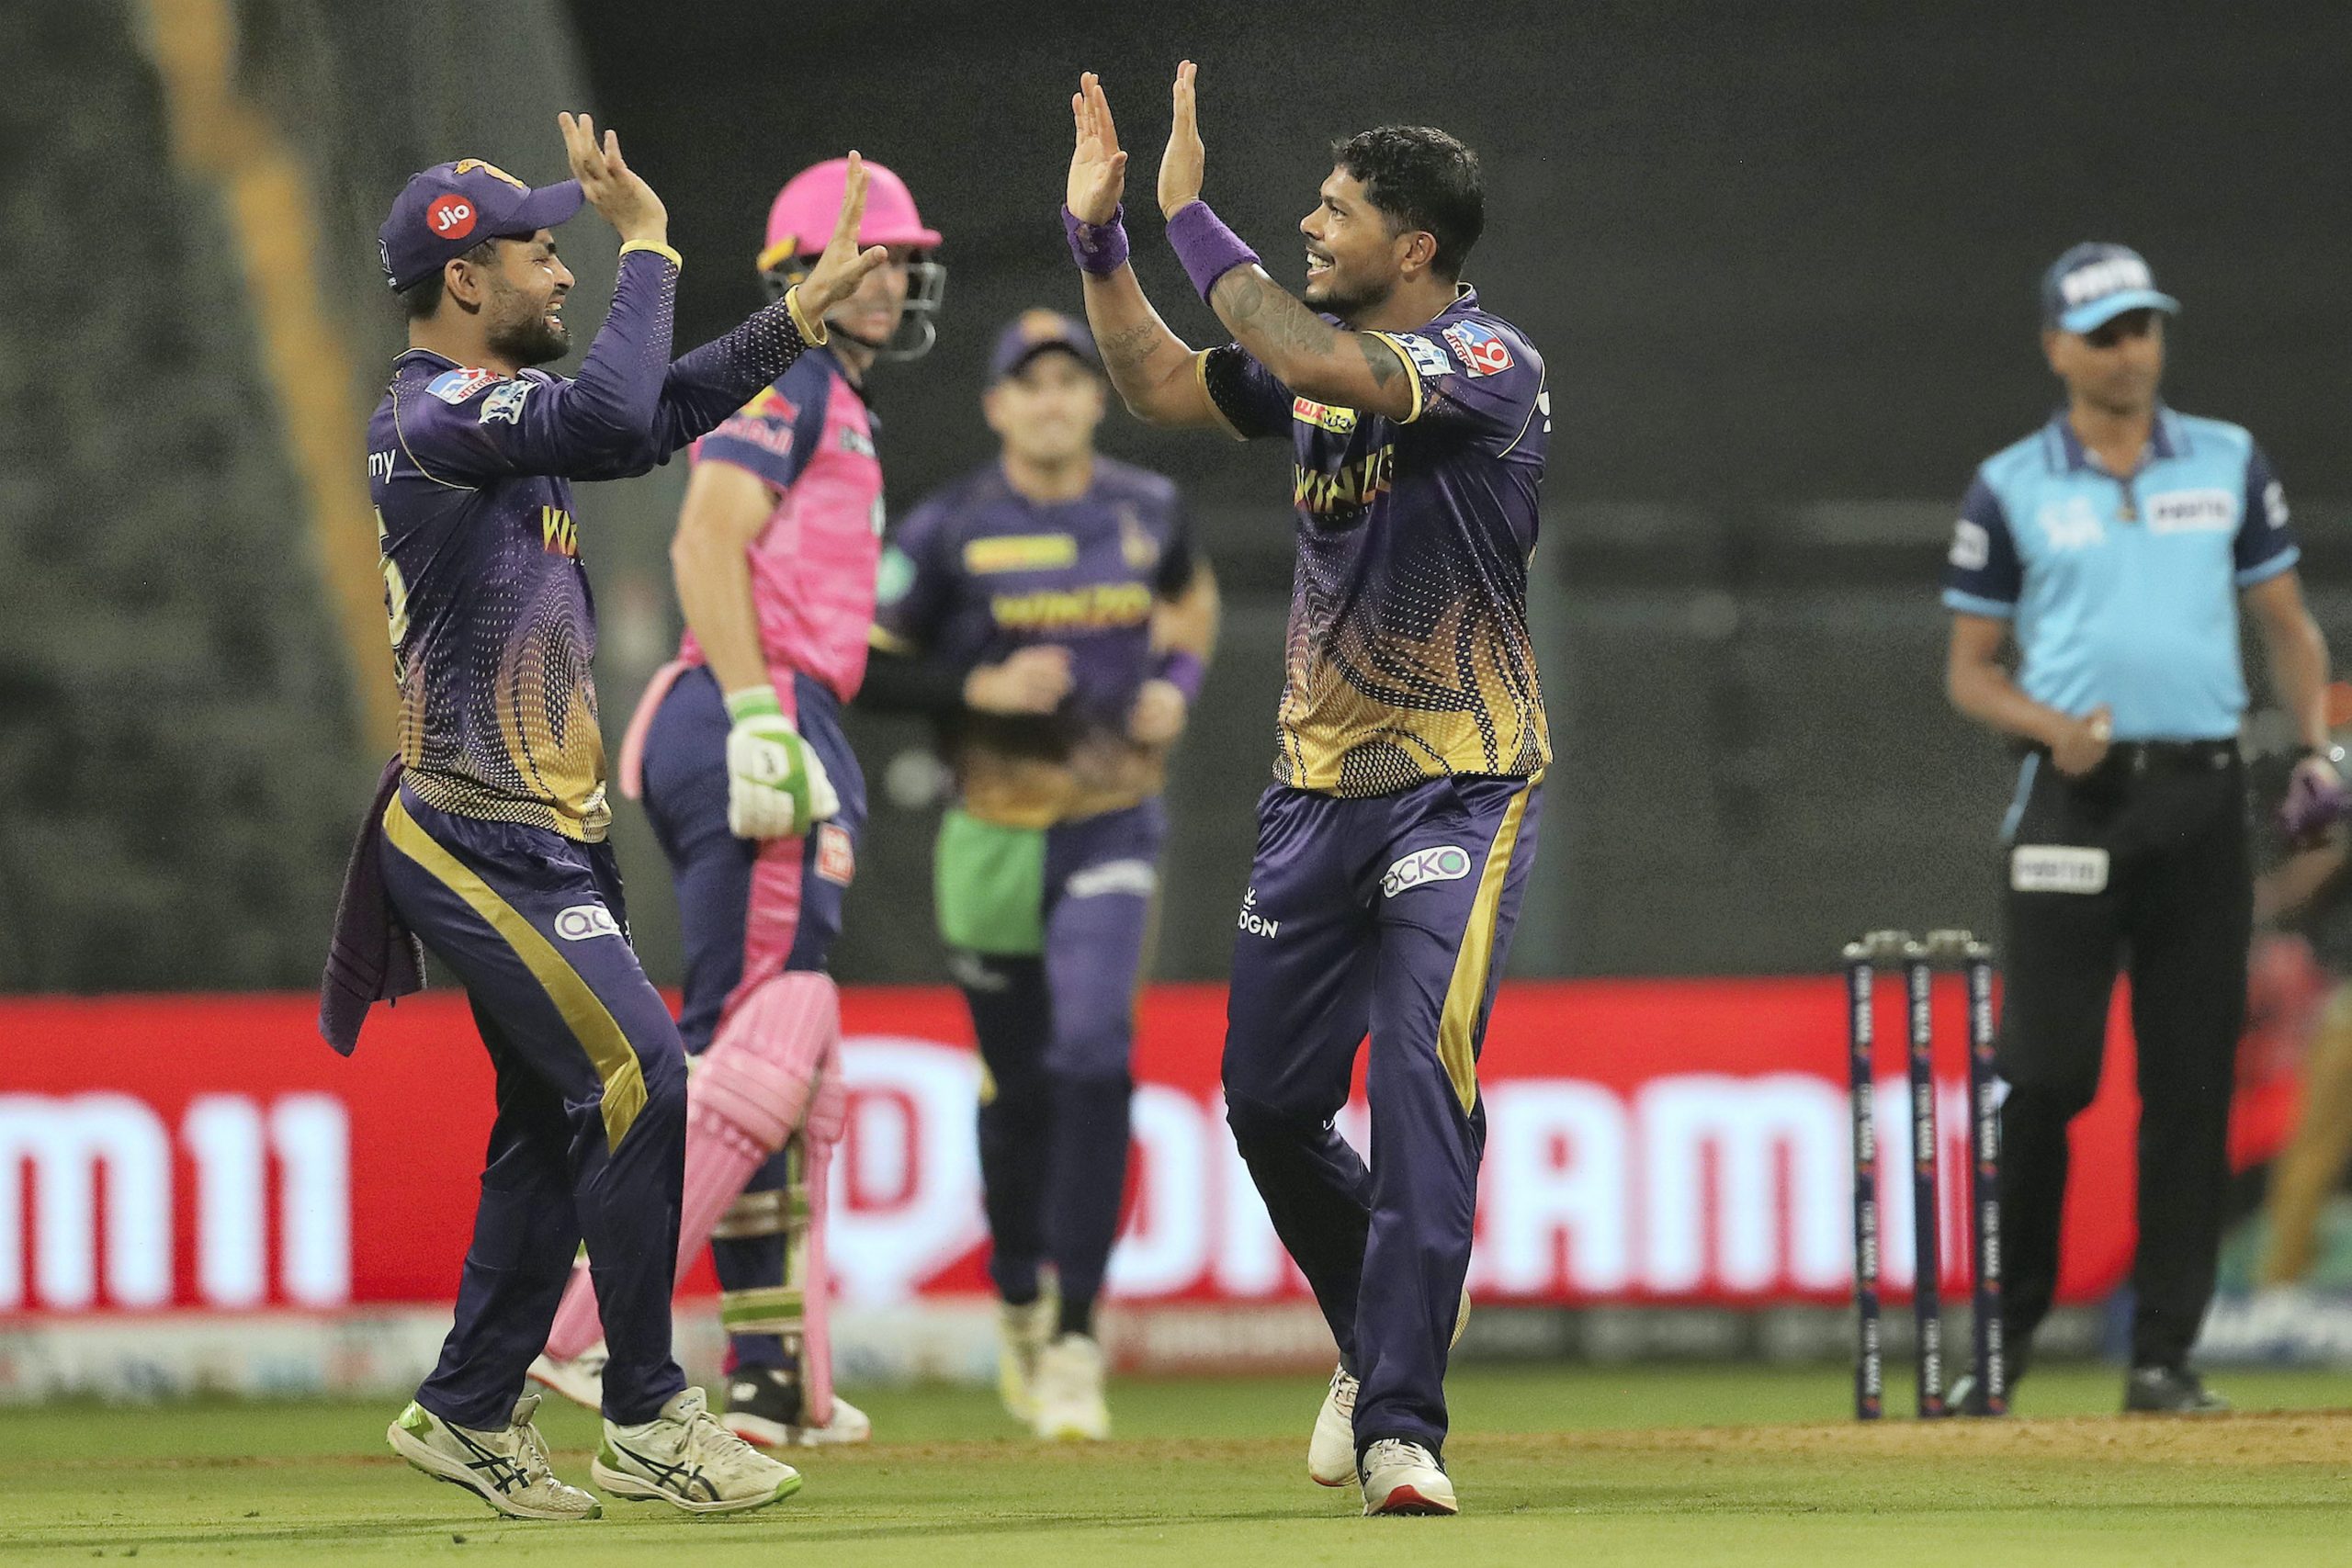 IPL 2022: KL Rahul is the player to watch as KKR prepares to face LSG